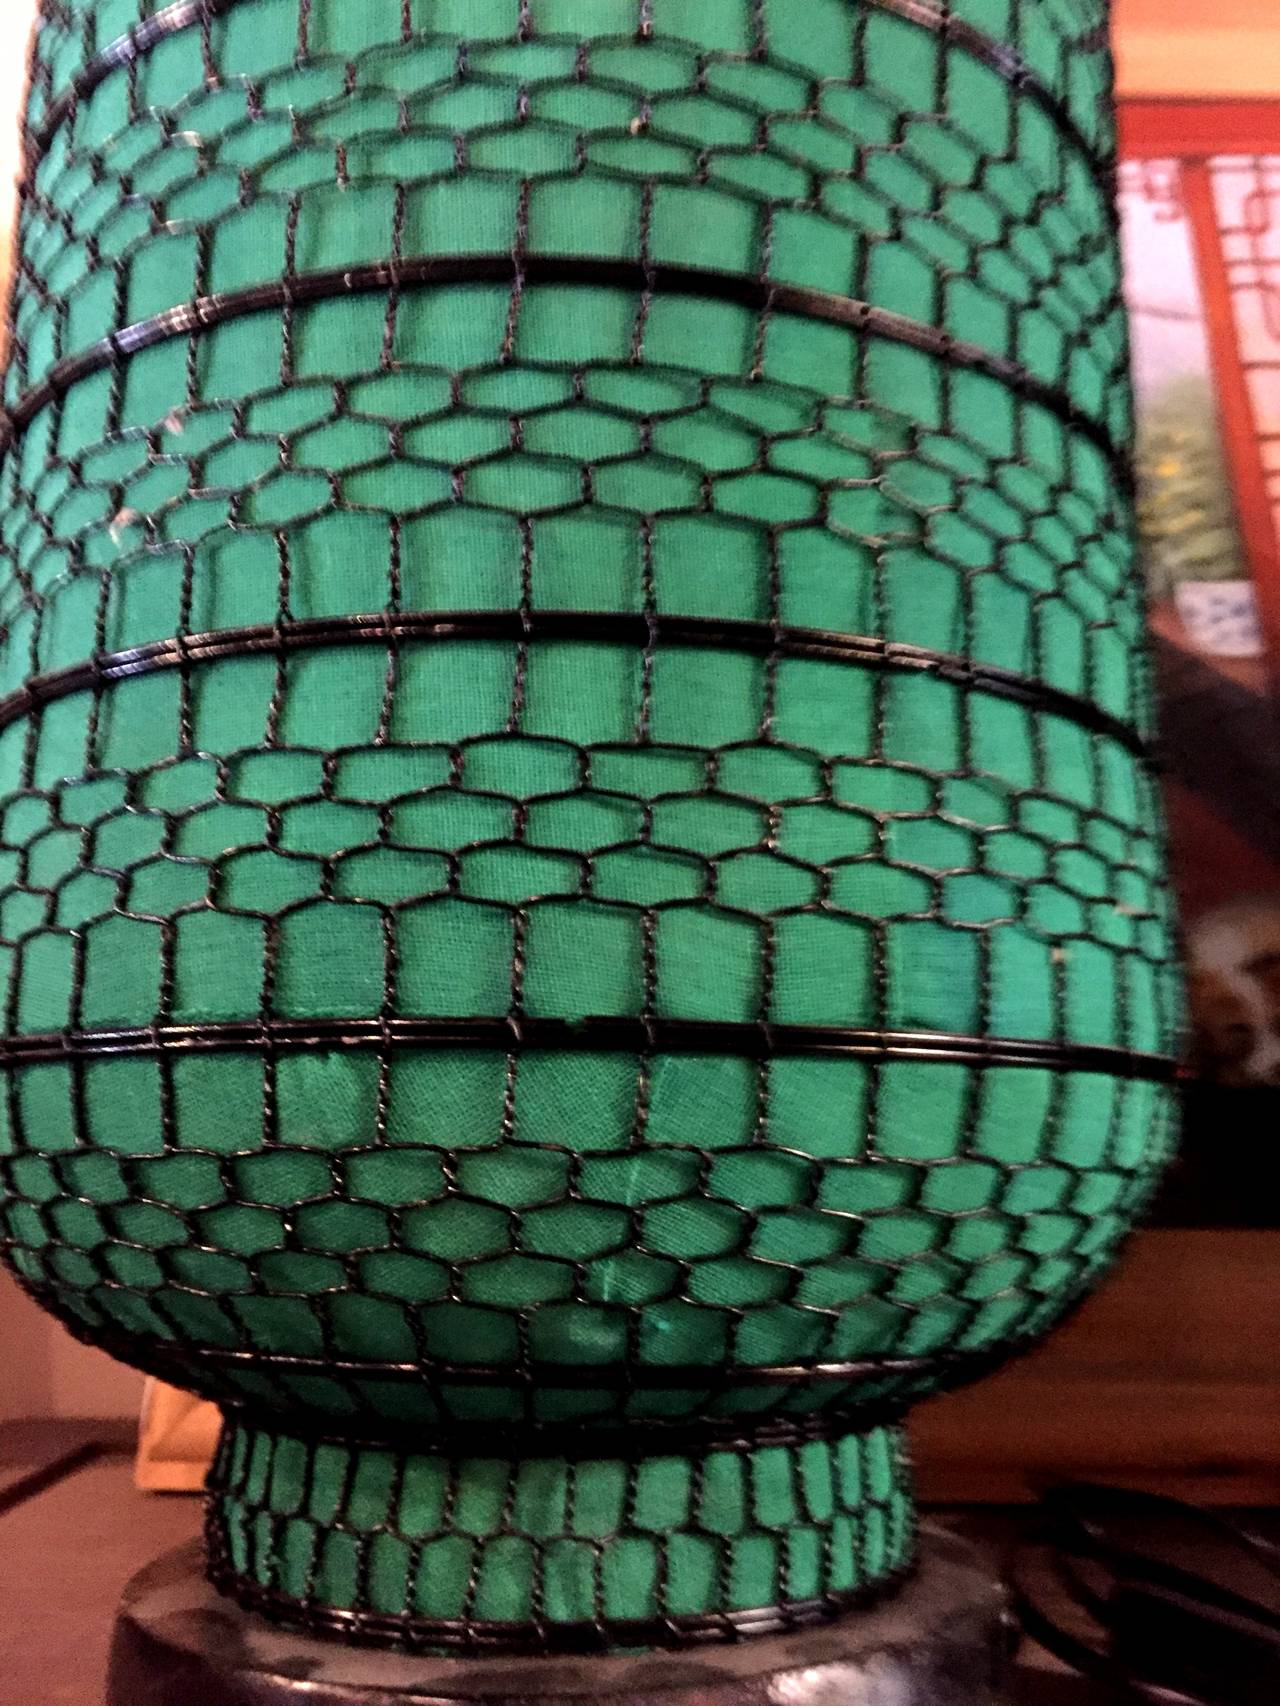 These lanterns are not your run of the mill China Town ones. These are meticulously hand crafted in the old fashioned way, which sadly is no longer being practiced. Each metal wire was hand twisted and connected to form a geometric pattern. This is